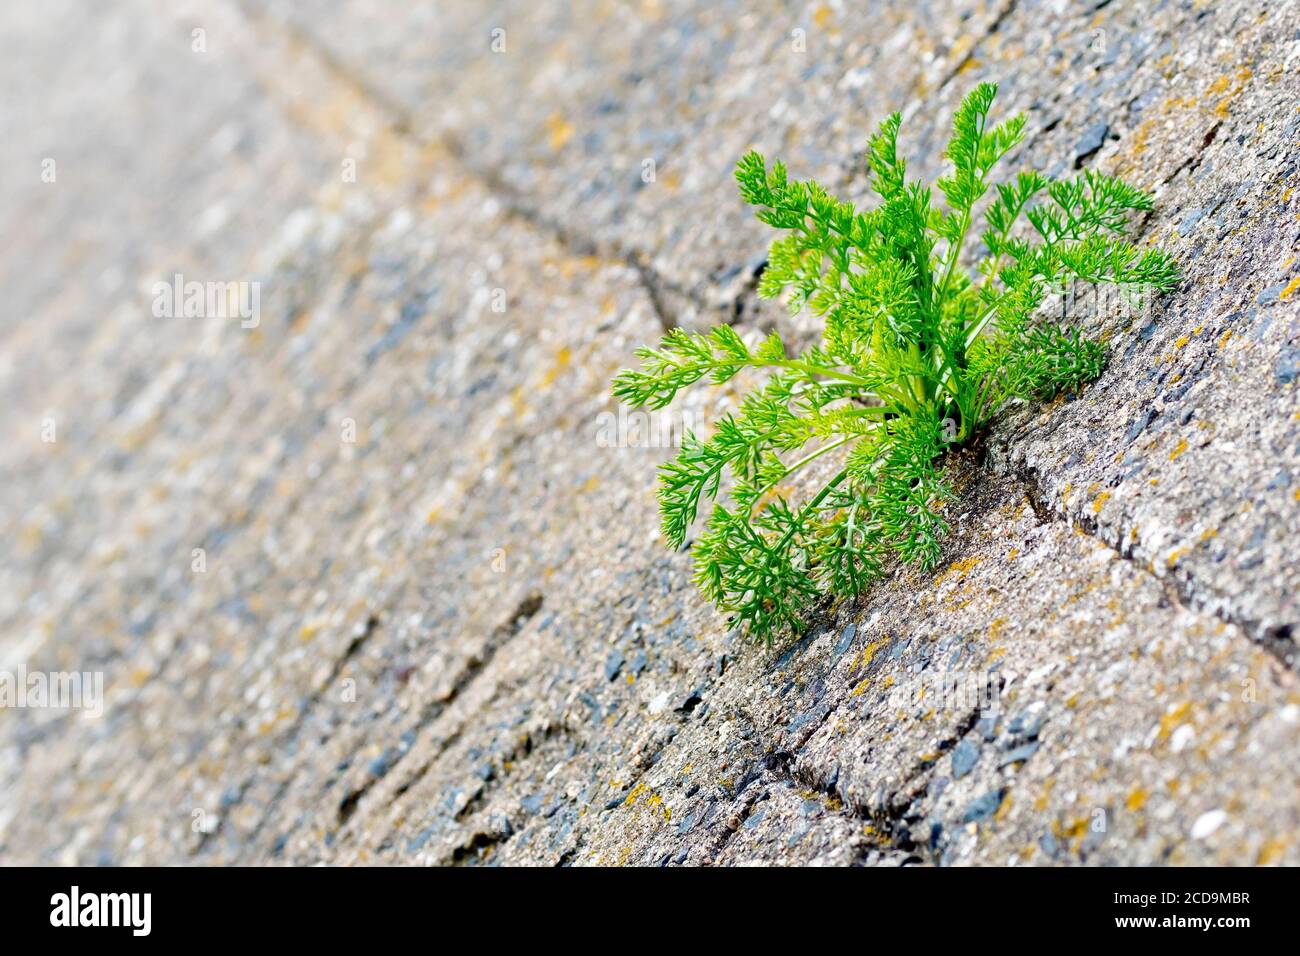 Close up of a Mayweed plant (tripleurospermum, matricaria) sprouting from a crack in the concrete sea defences along the shore. Stock Photo